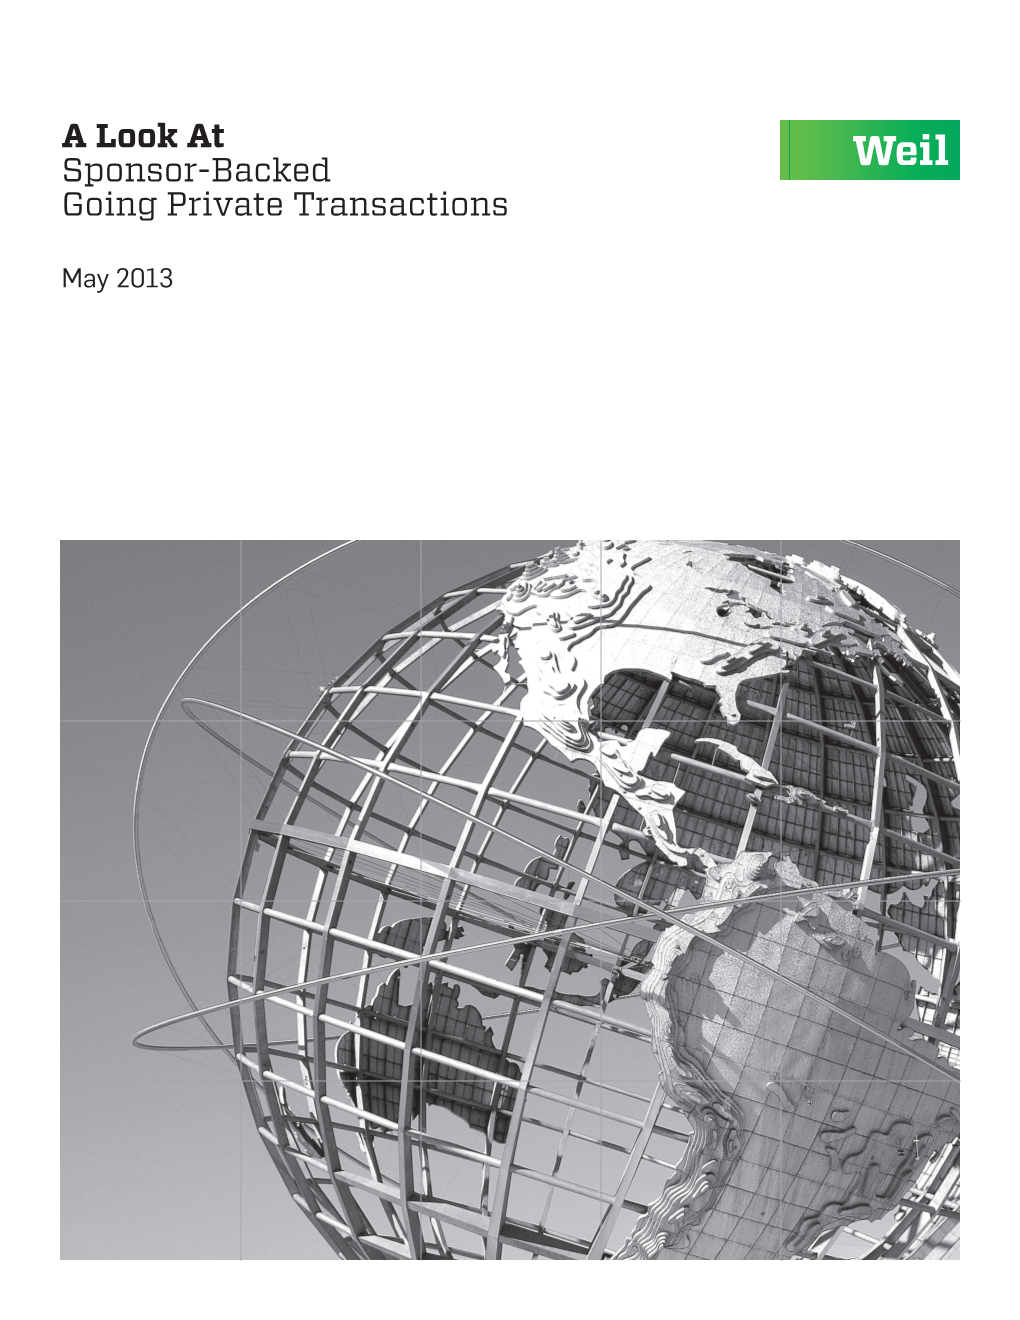 A Look at Sponsor-Backed Going Private Transactions